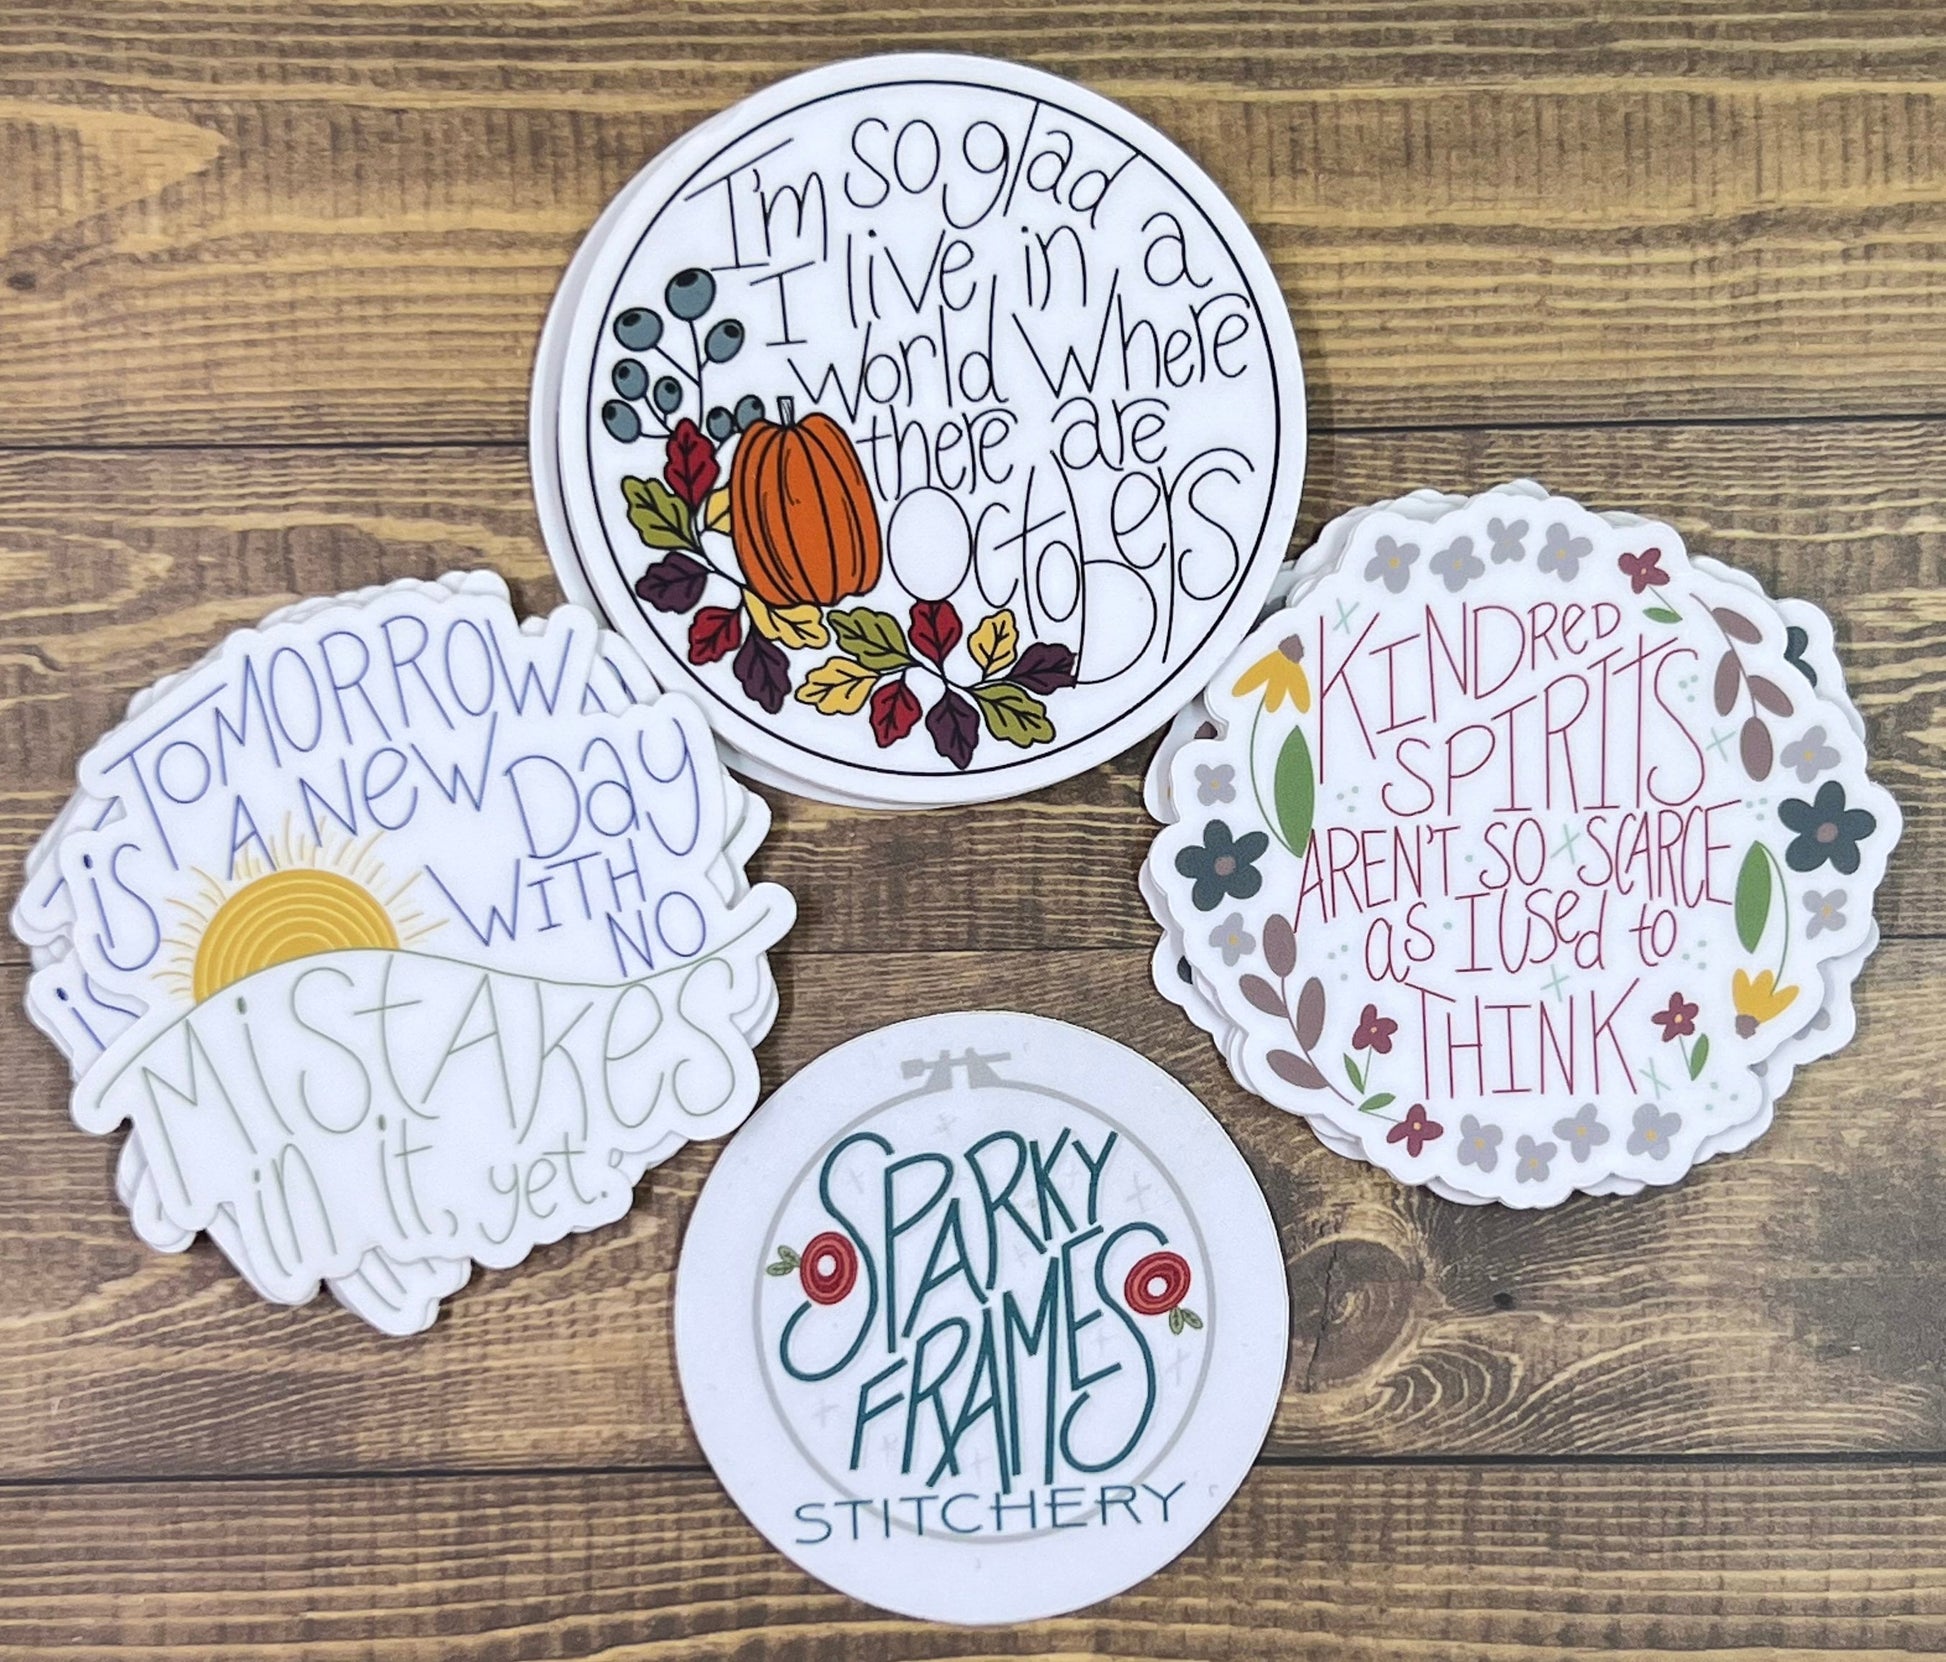 Vinyl STICKER | Anne Shirley Quote | Kindred Spirits Aren't Scarce Quote | Water Bottle Laptop Decal | Anne of Green Gables Gift |